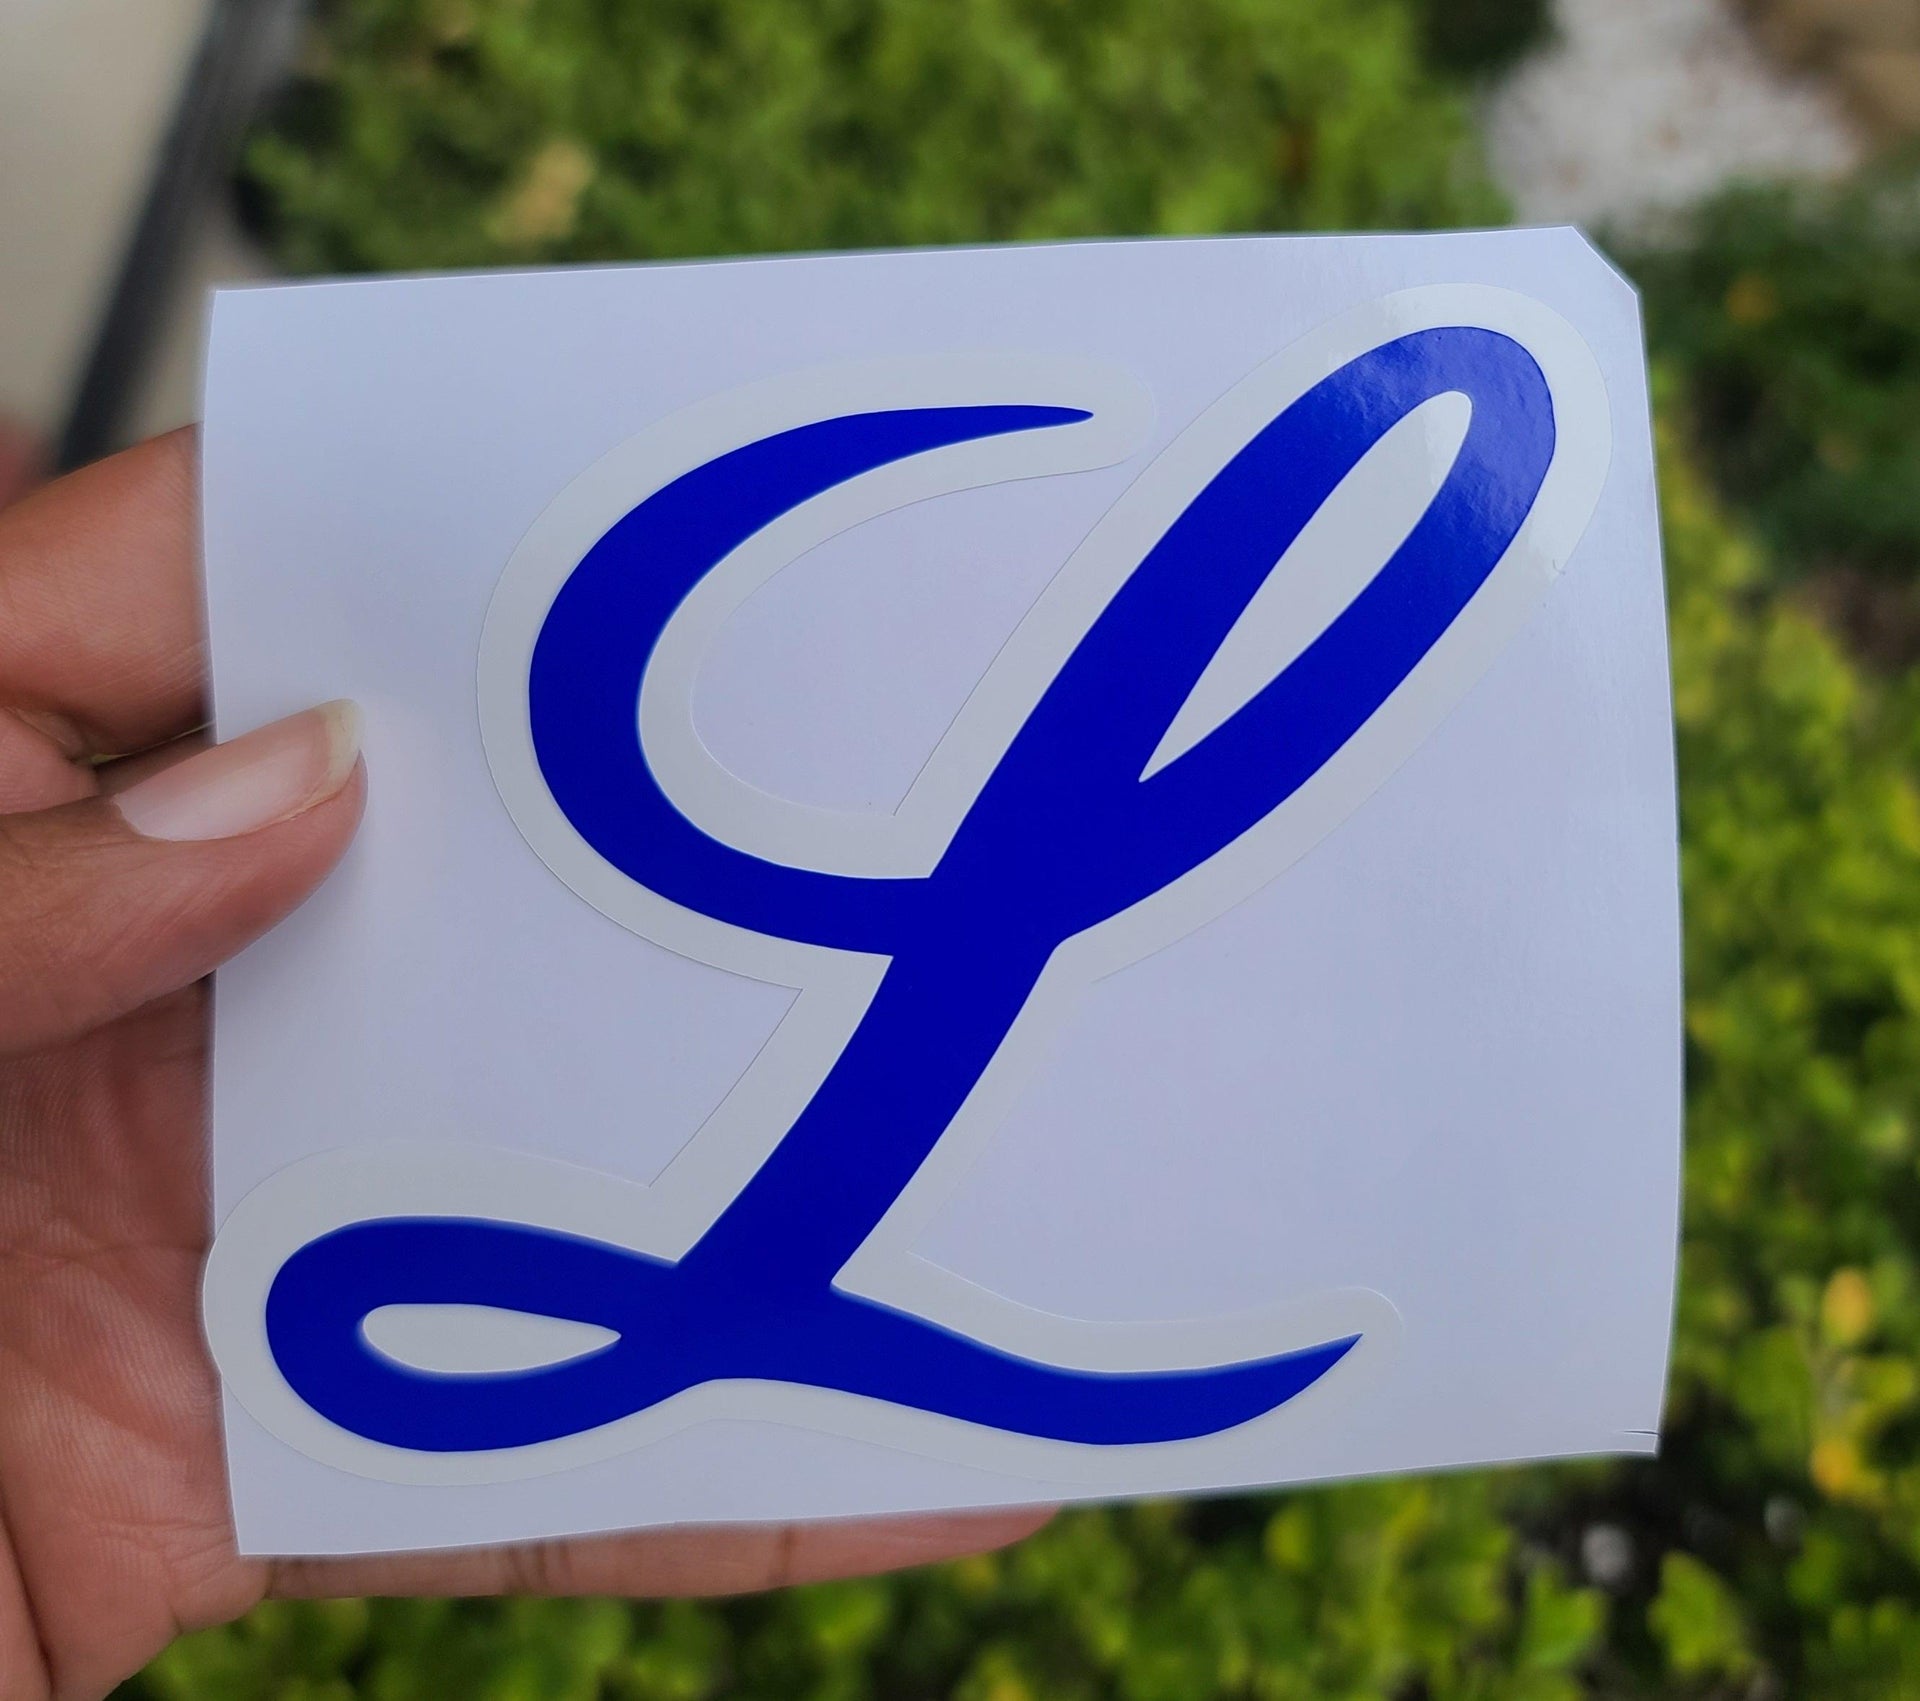 Licey Vynil Car Sticker Dominican Baseball Stickers Bumpers Stickers Tigres del Licey - Art By Suleny Craft Store LLC